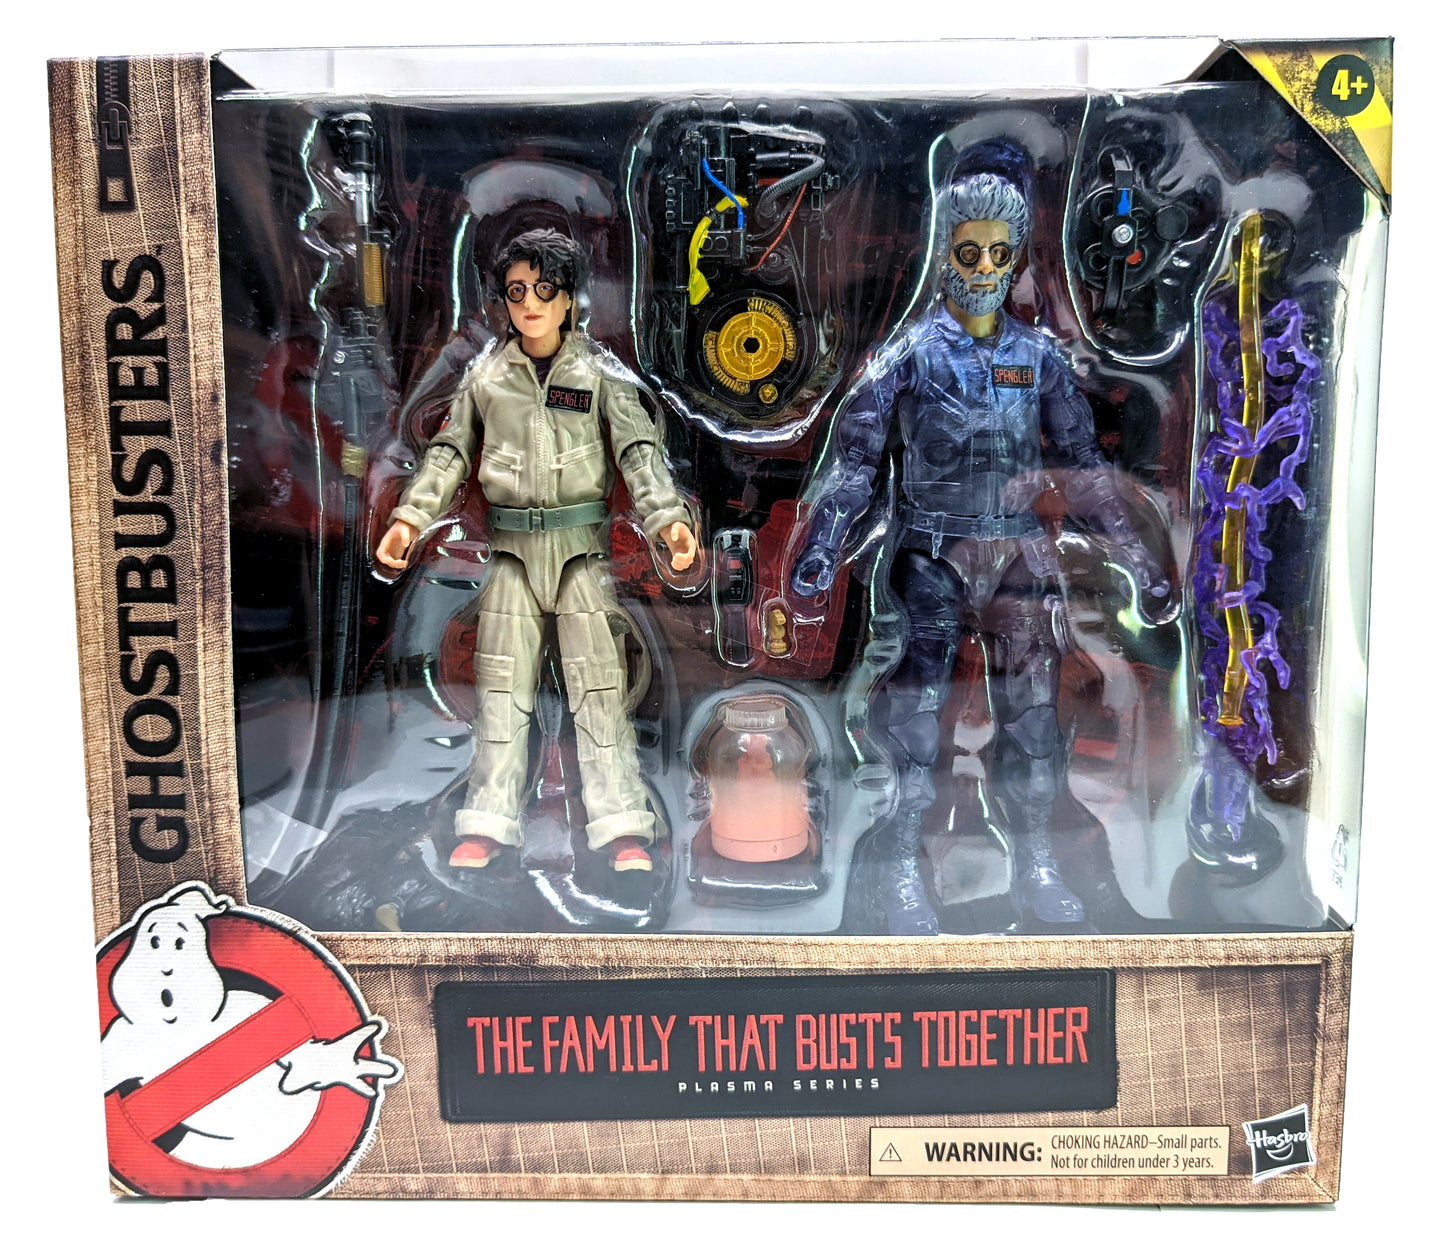 Ghostbusters - Plasma Series - The Family Busts Together - Target Exclusive